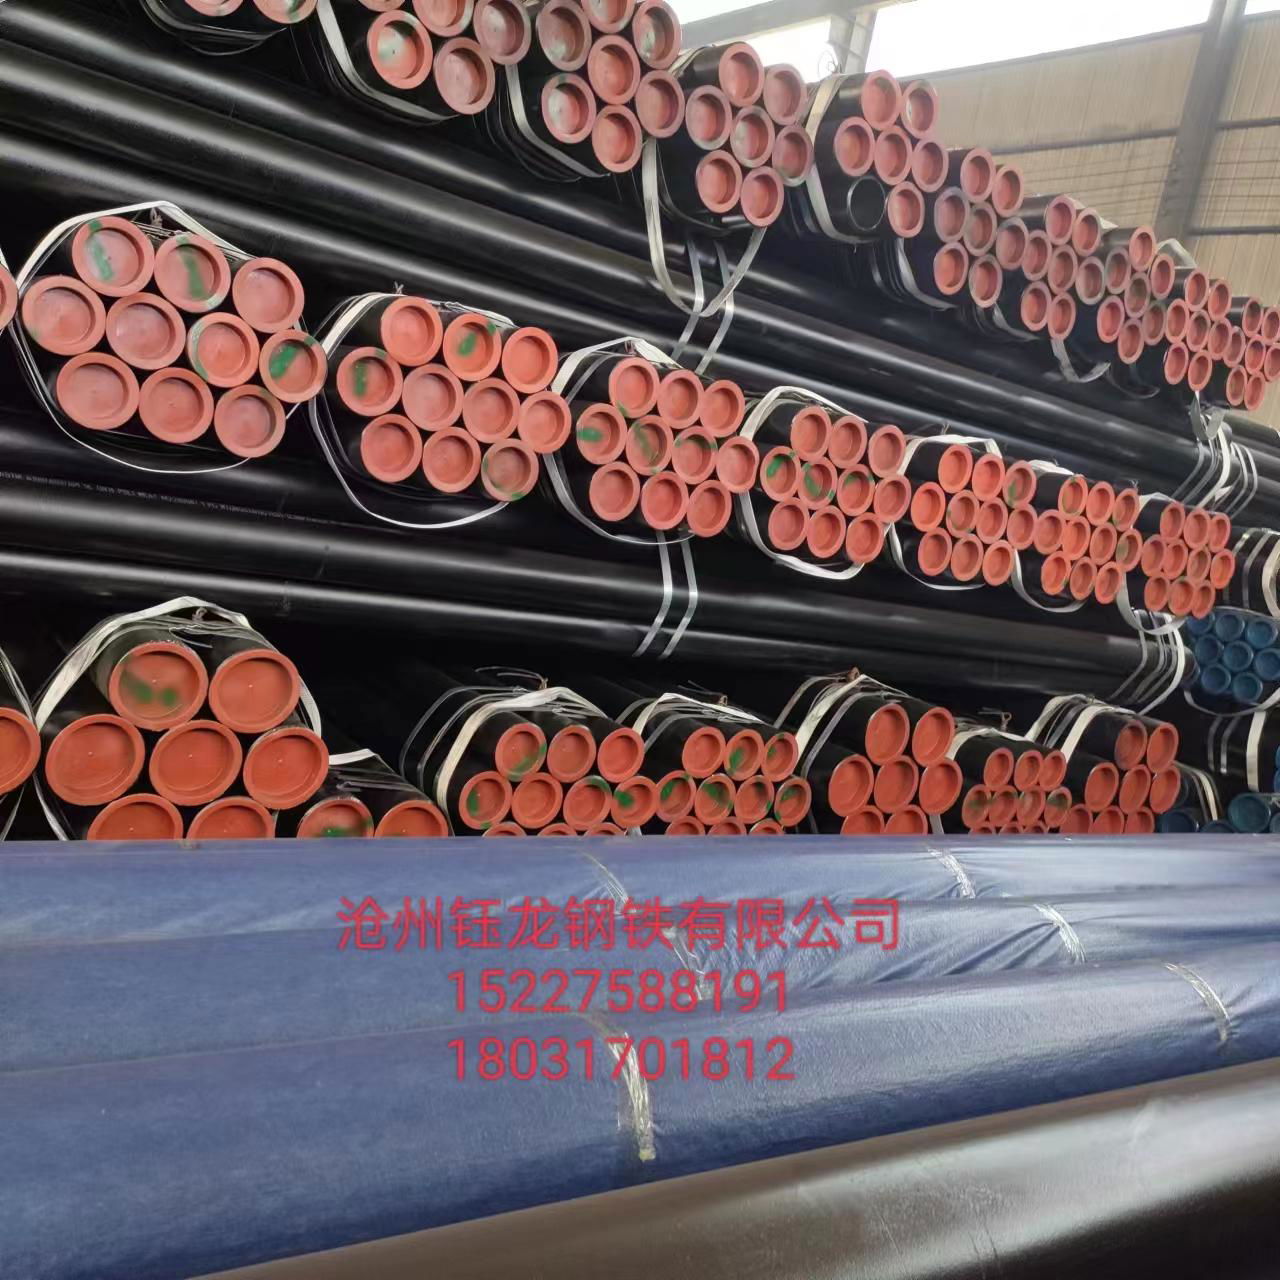 Spiral welded pipe for pile driving at sea in Fangcheng Port 2